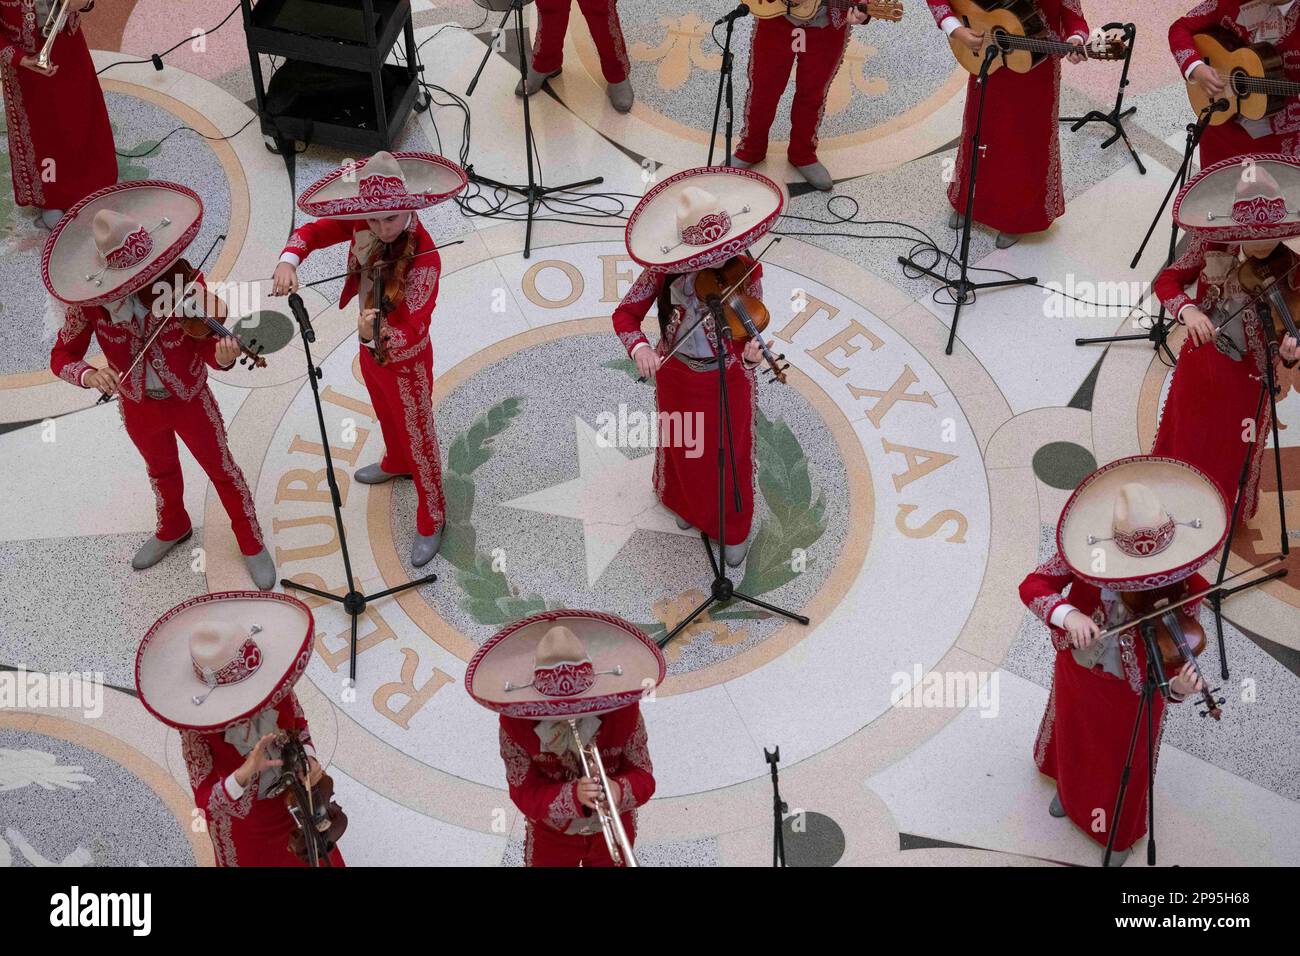 A high school mariachi from Starr County, Texas performs a noontime concert in the Texas Capitol Rotunda on March 7, 2023.  Mariachi is a type of traditional Mexican folk music, typically performed by a small group of strolling musicians dressed in native costume, and is especially popular  in south Texas, where high school groups often perform in competitions. ©Bob Daemmrich Stock Photo